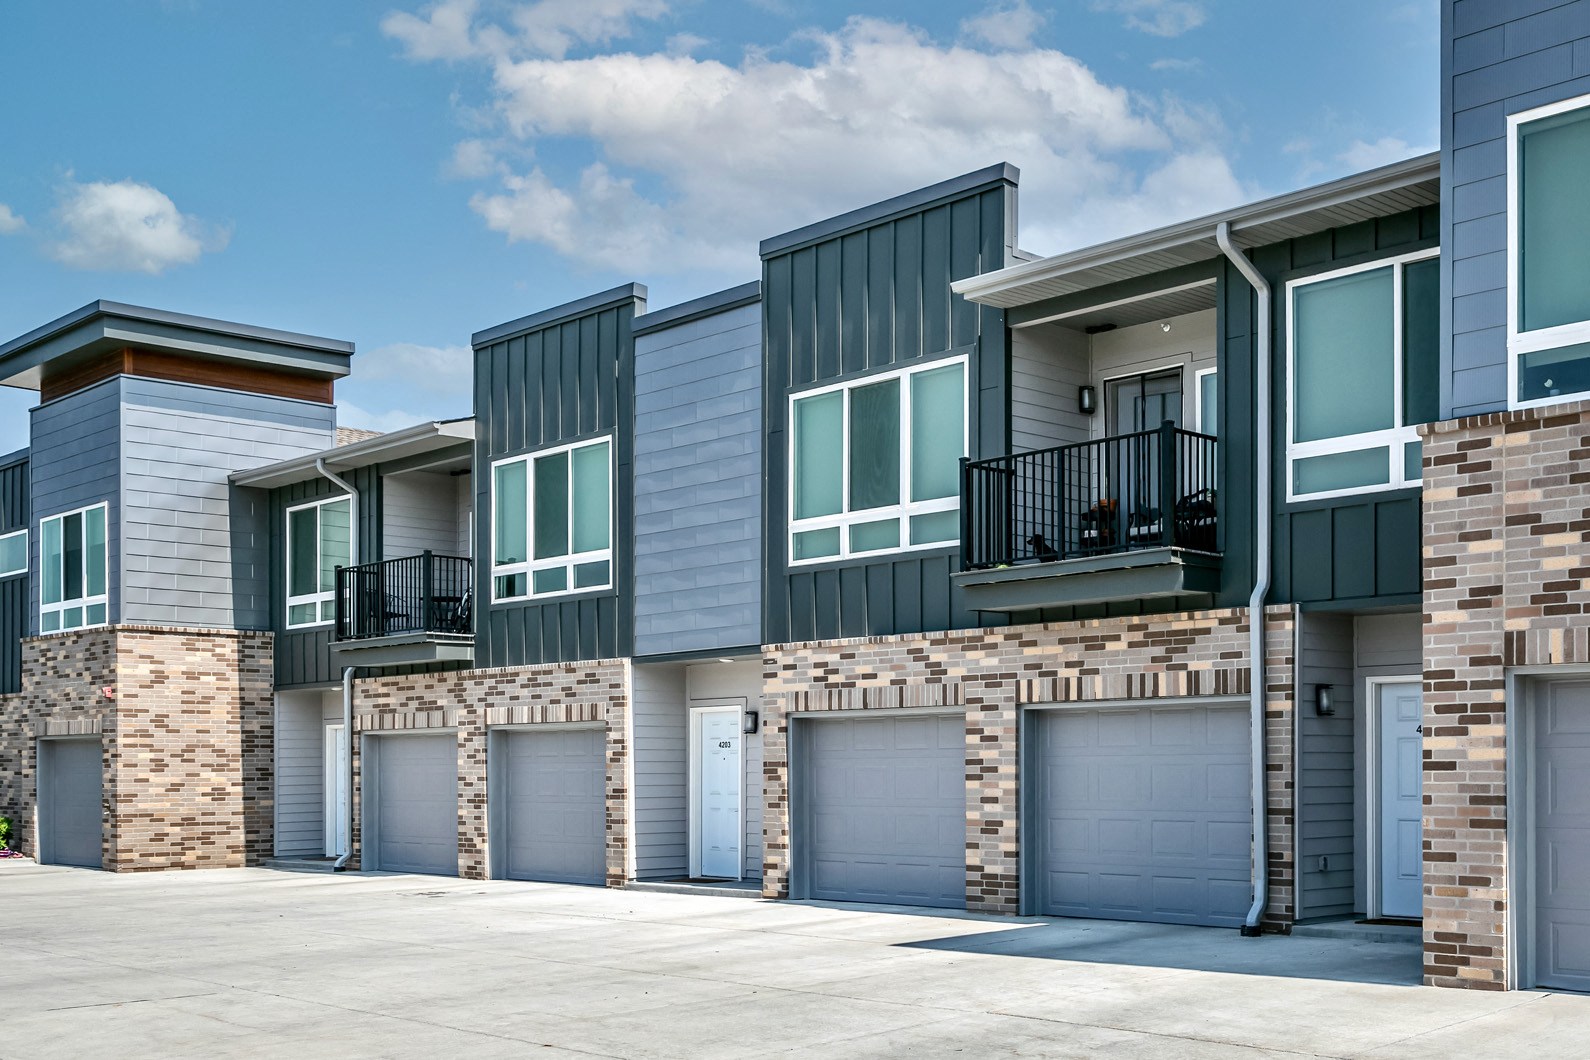 Property exterior with attached garages at AXIS apartments in Papillion, NE